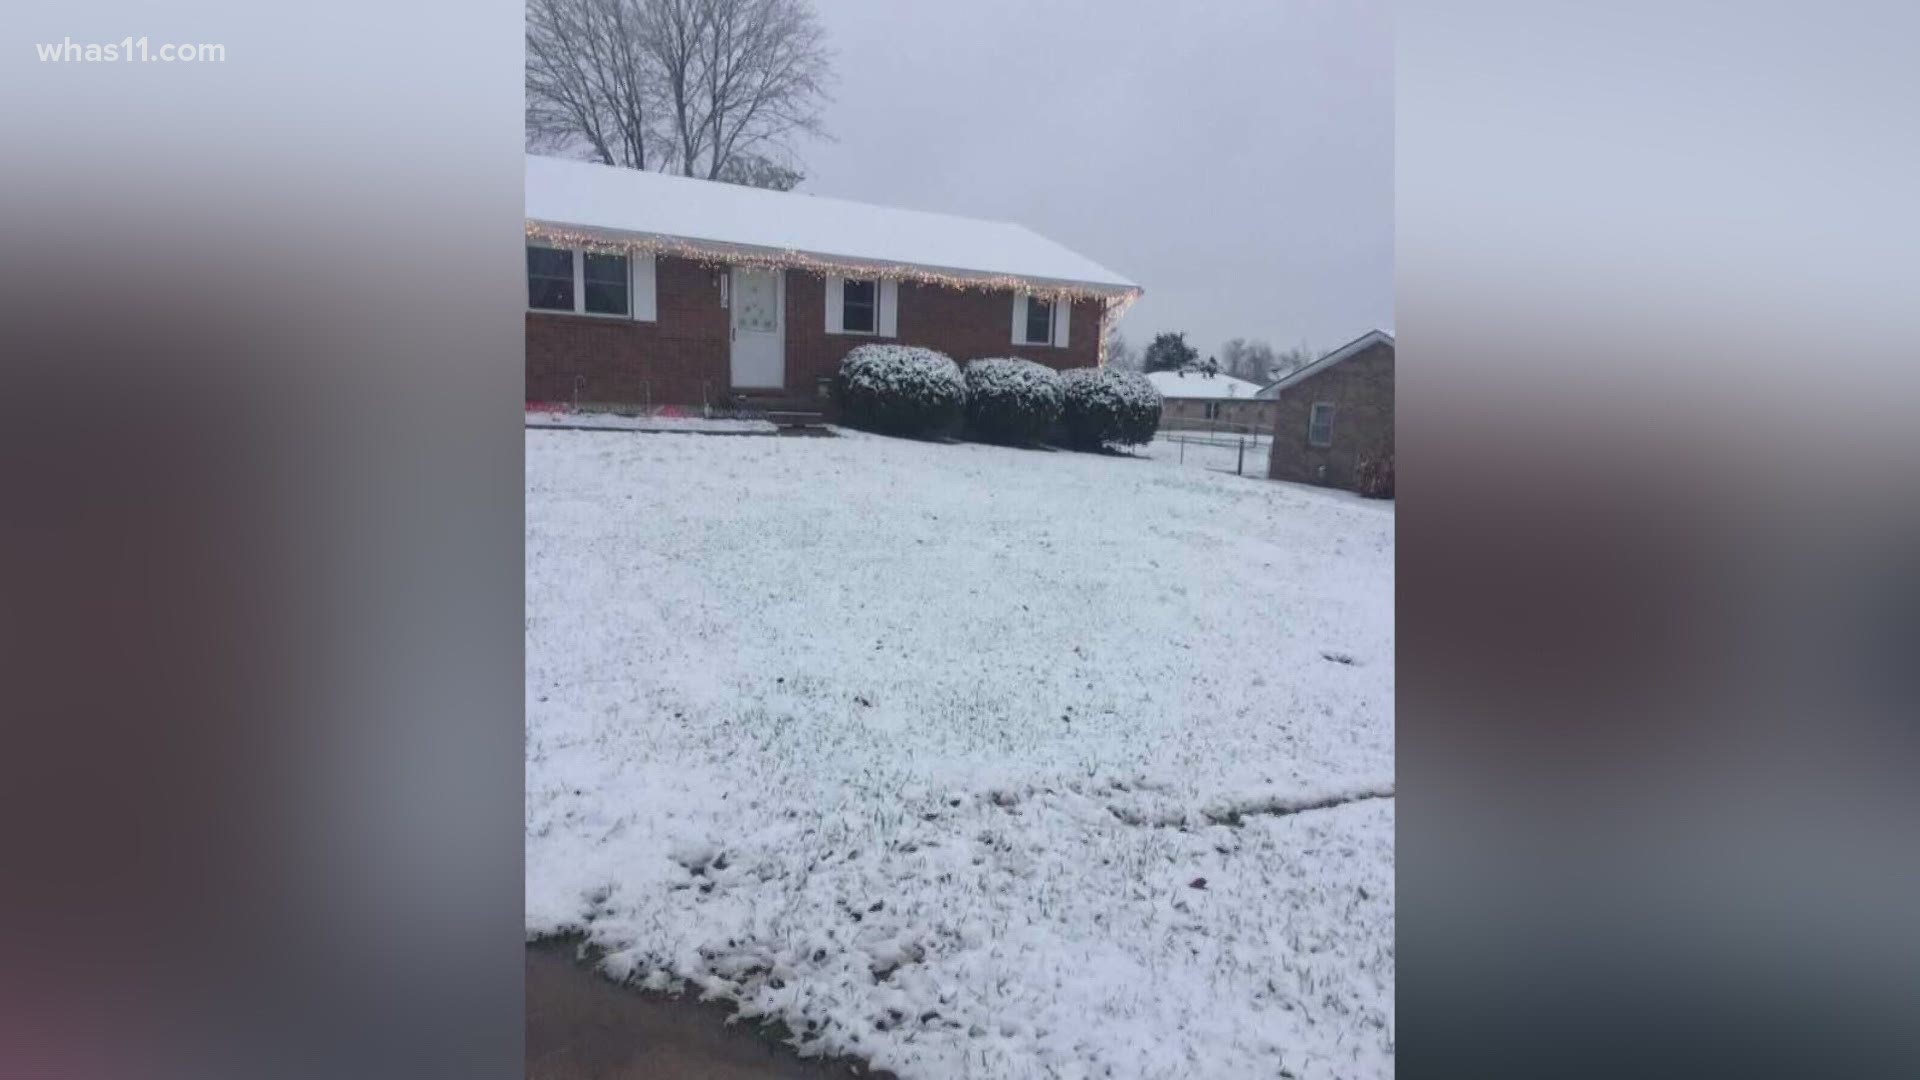 Reporter Ellen Smith follows the flakes and the excitement of Kentuckiana's first snow.